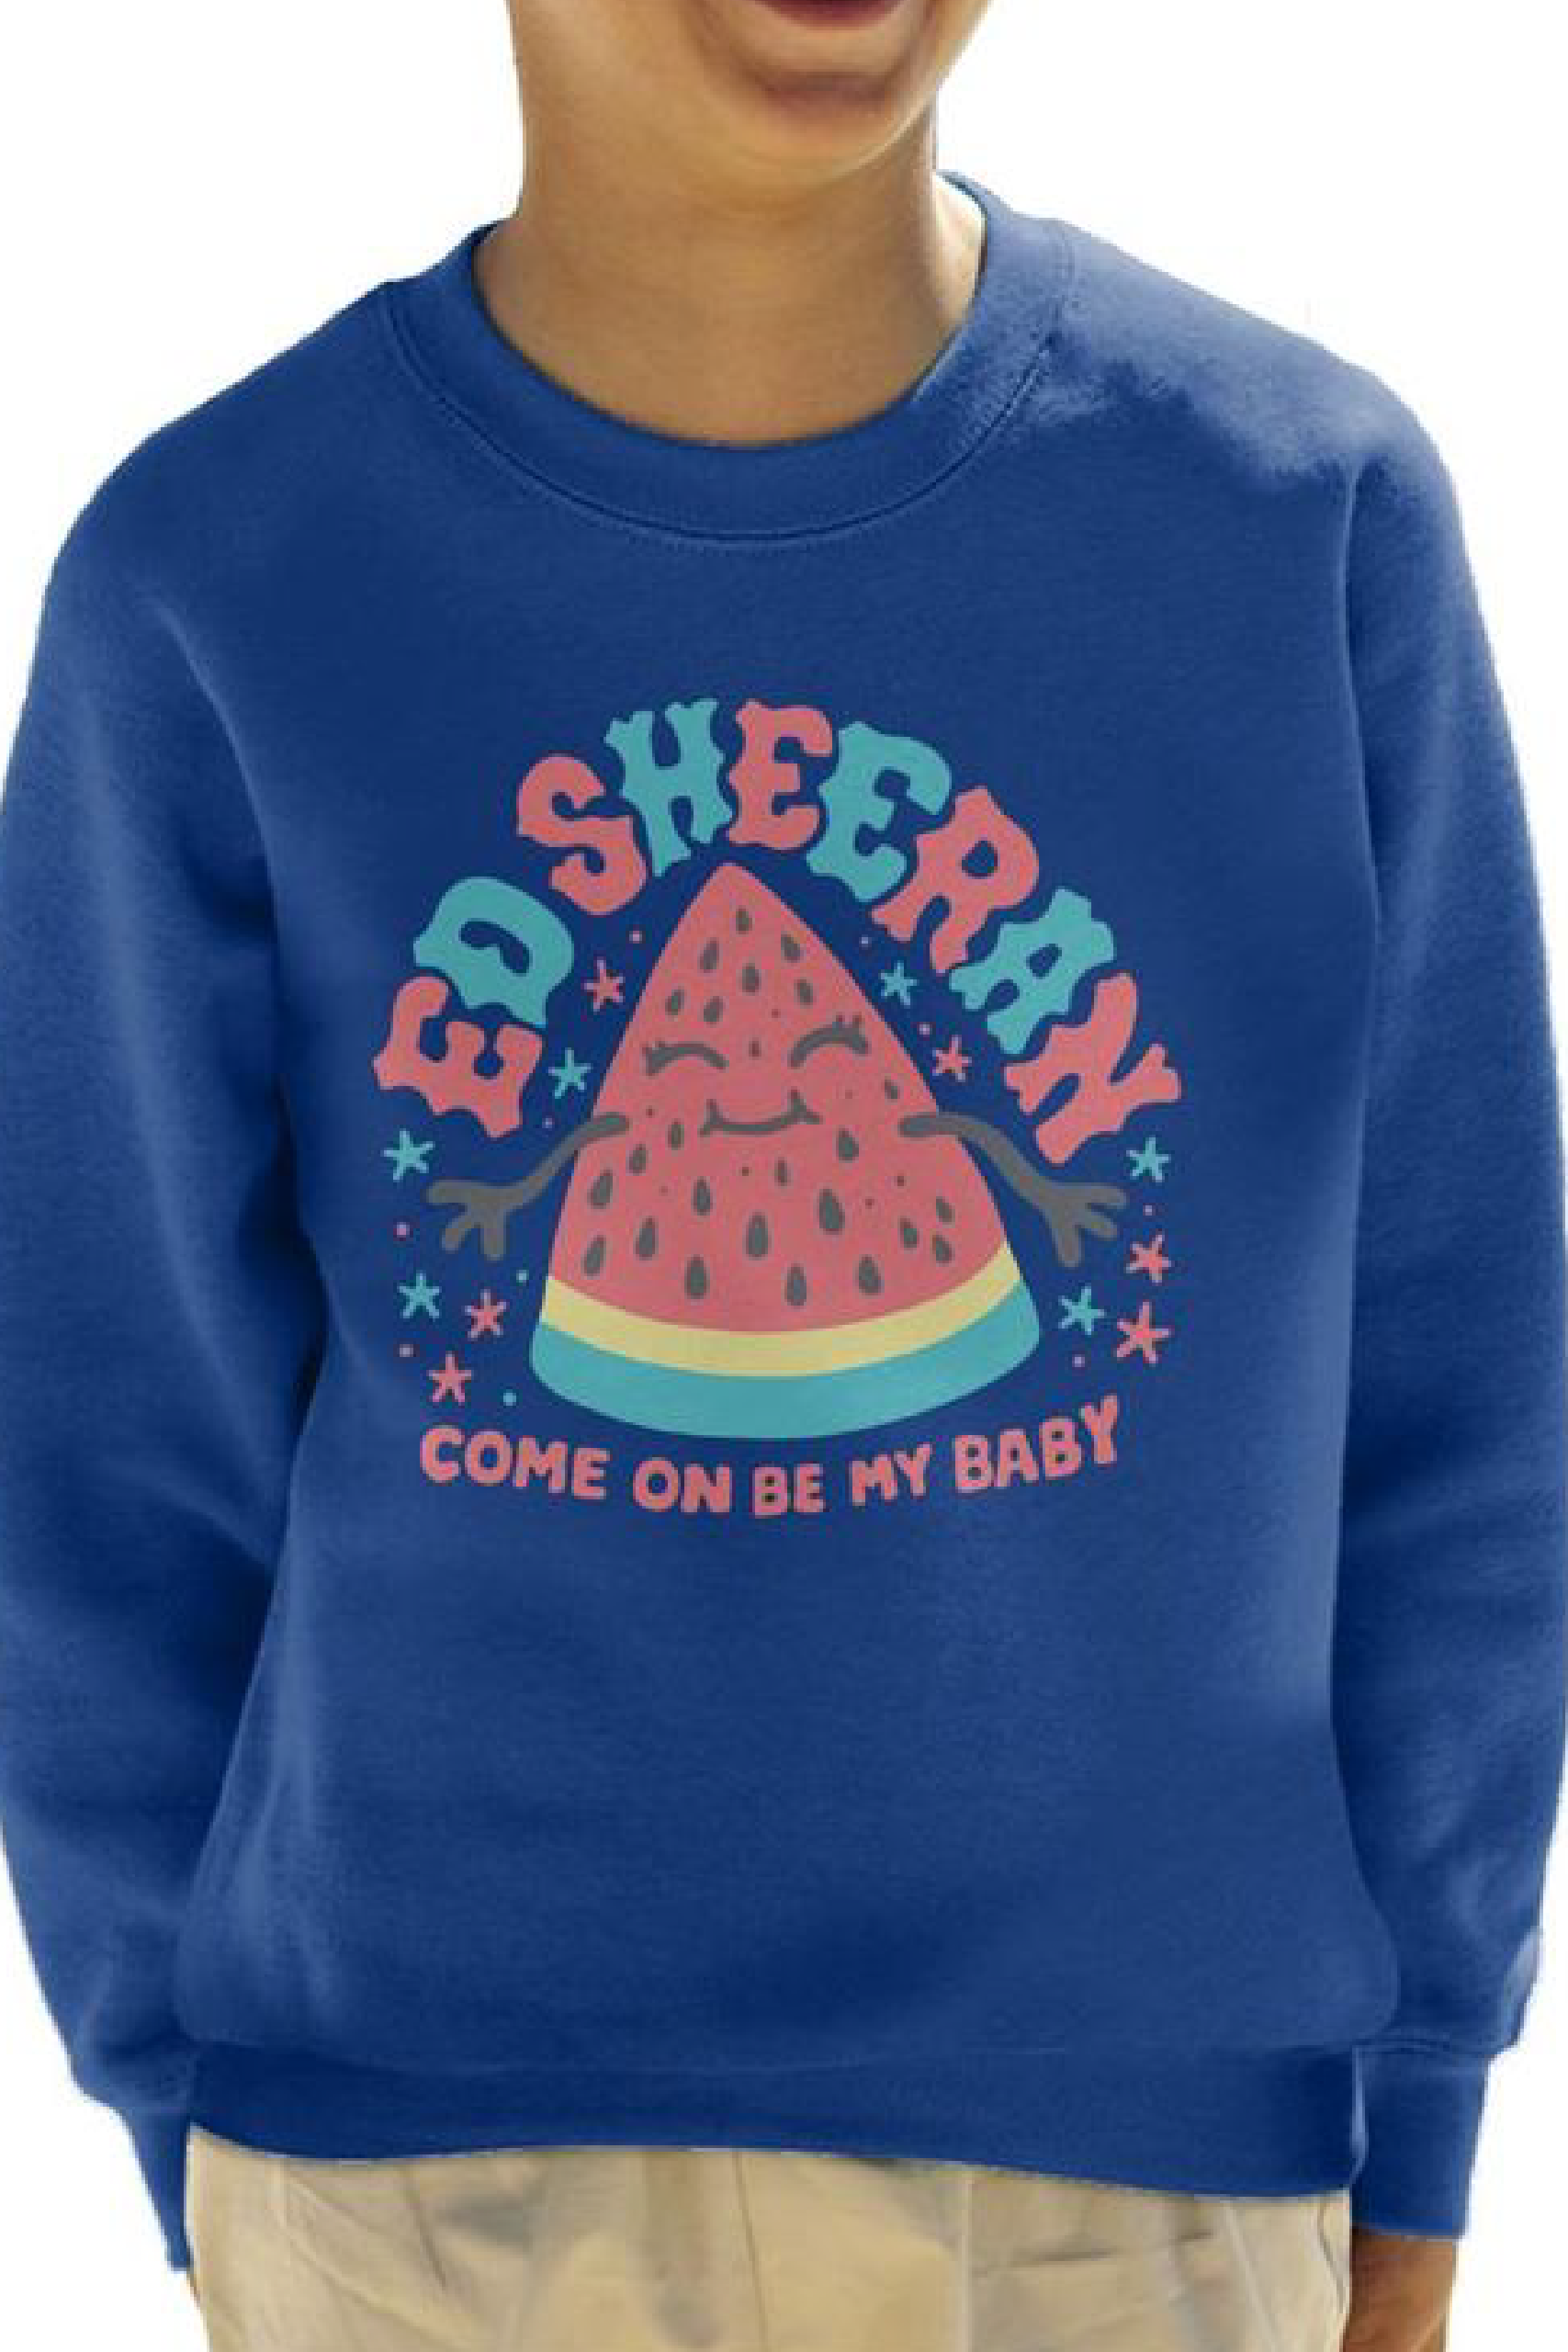 Ed Sheeran Equals Watermelon Come On Be My Baby Kid's Sweatshirt - White _ Large (9-11 yrs)-01